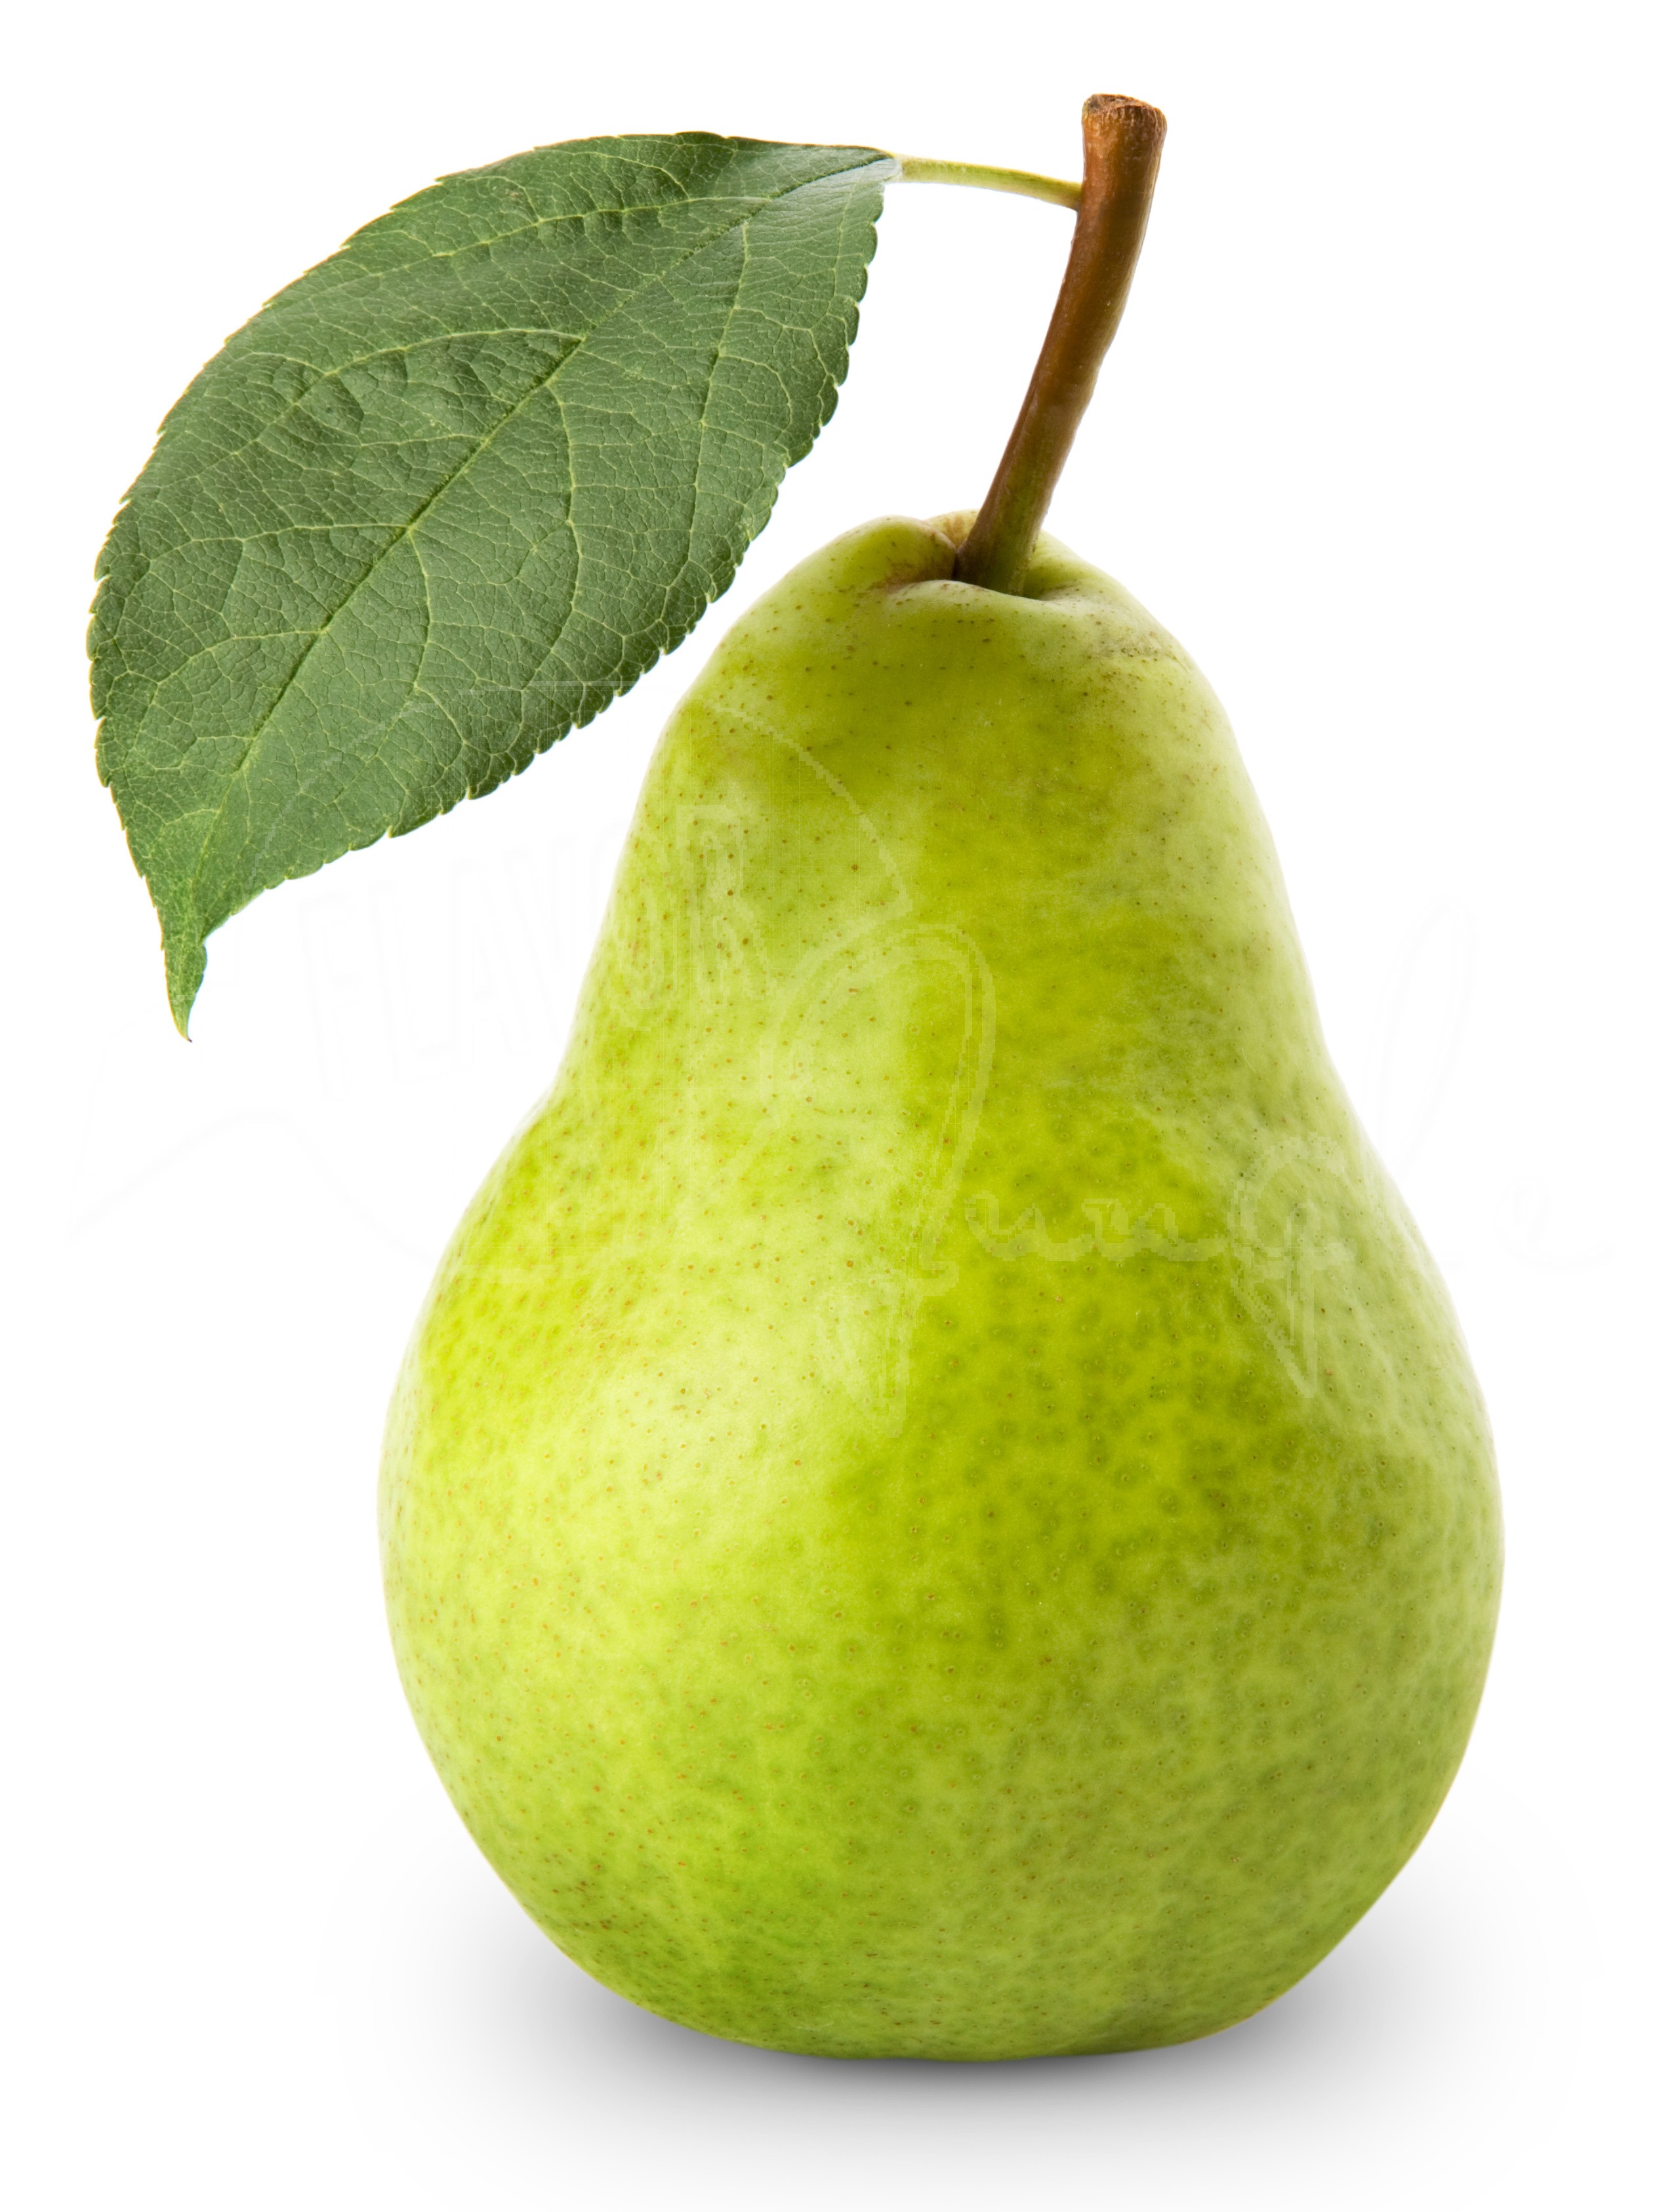 HDQ Beautiful Pear Images & Wallpapers (Gallery Images: 45)